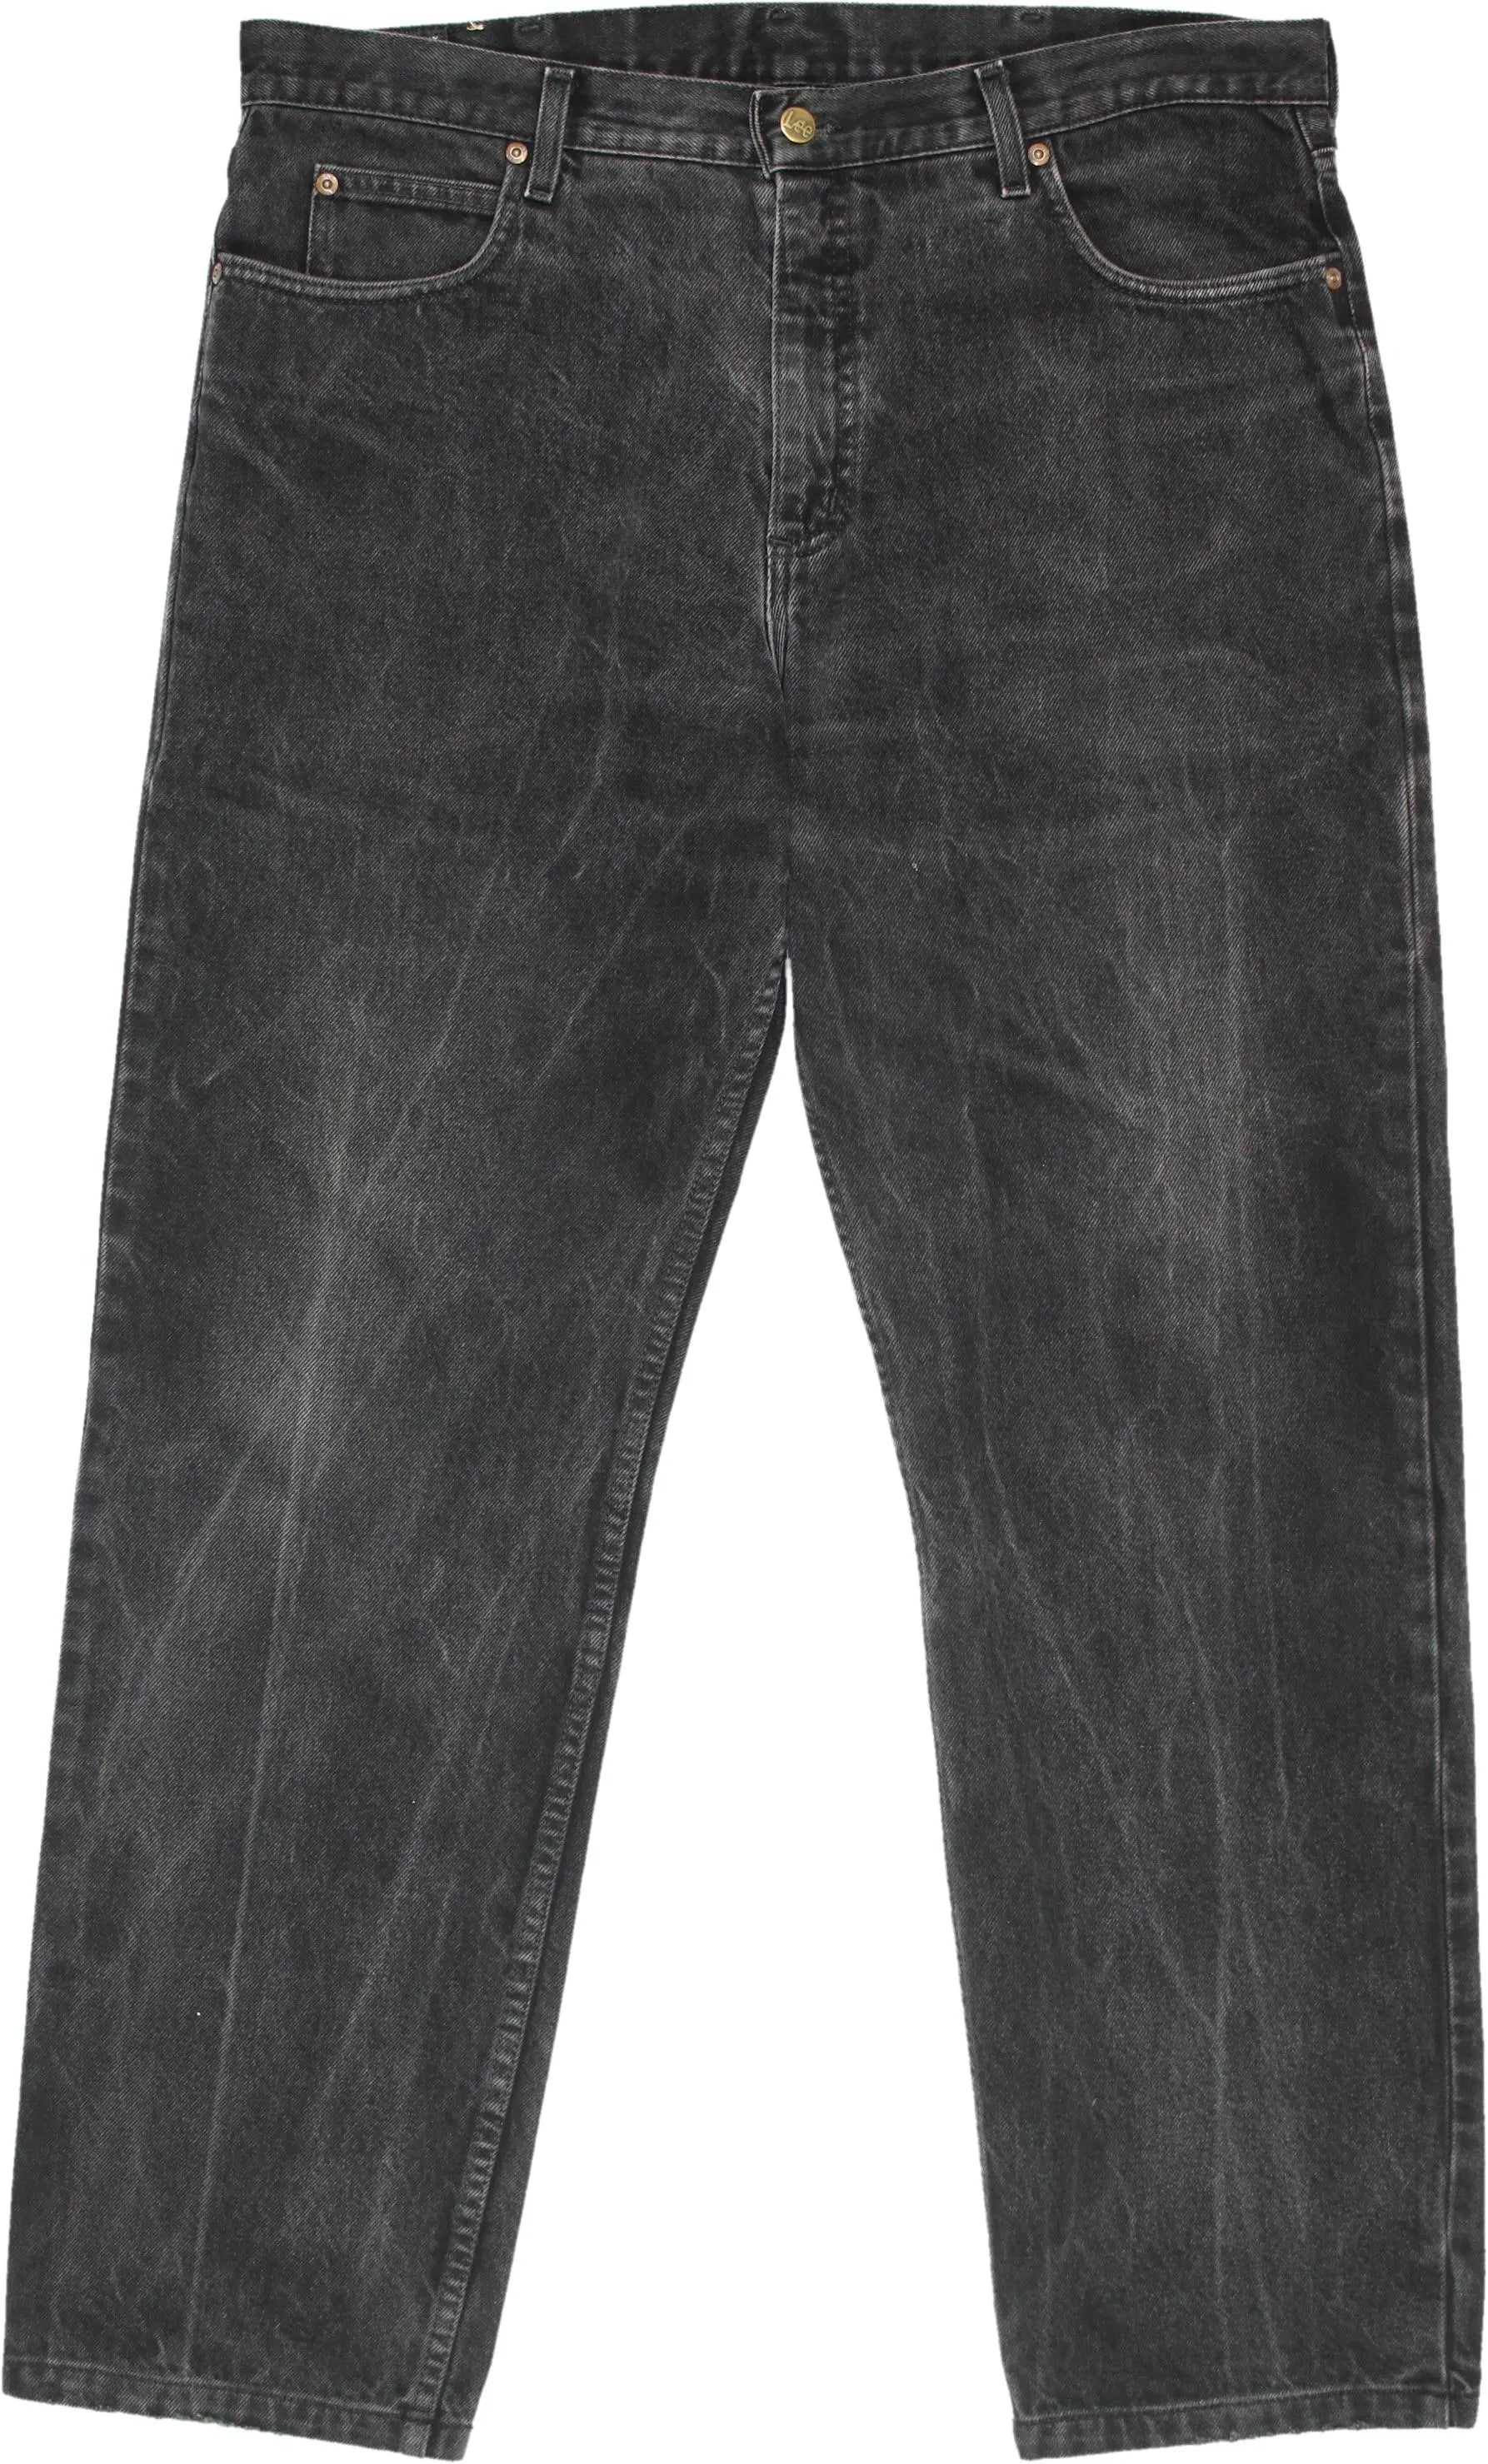 Lee - Detroit Jeans by Lee- ThriftTale.com - Vintage and second handclothing